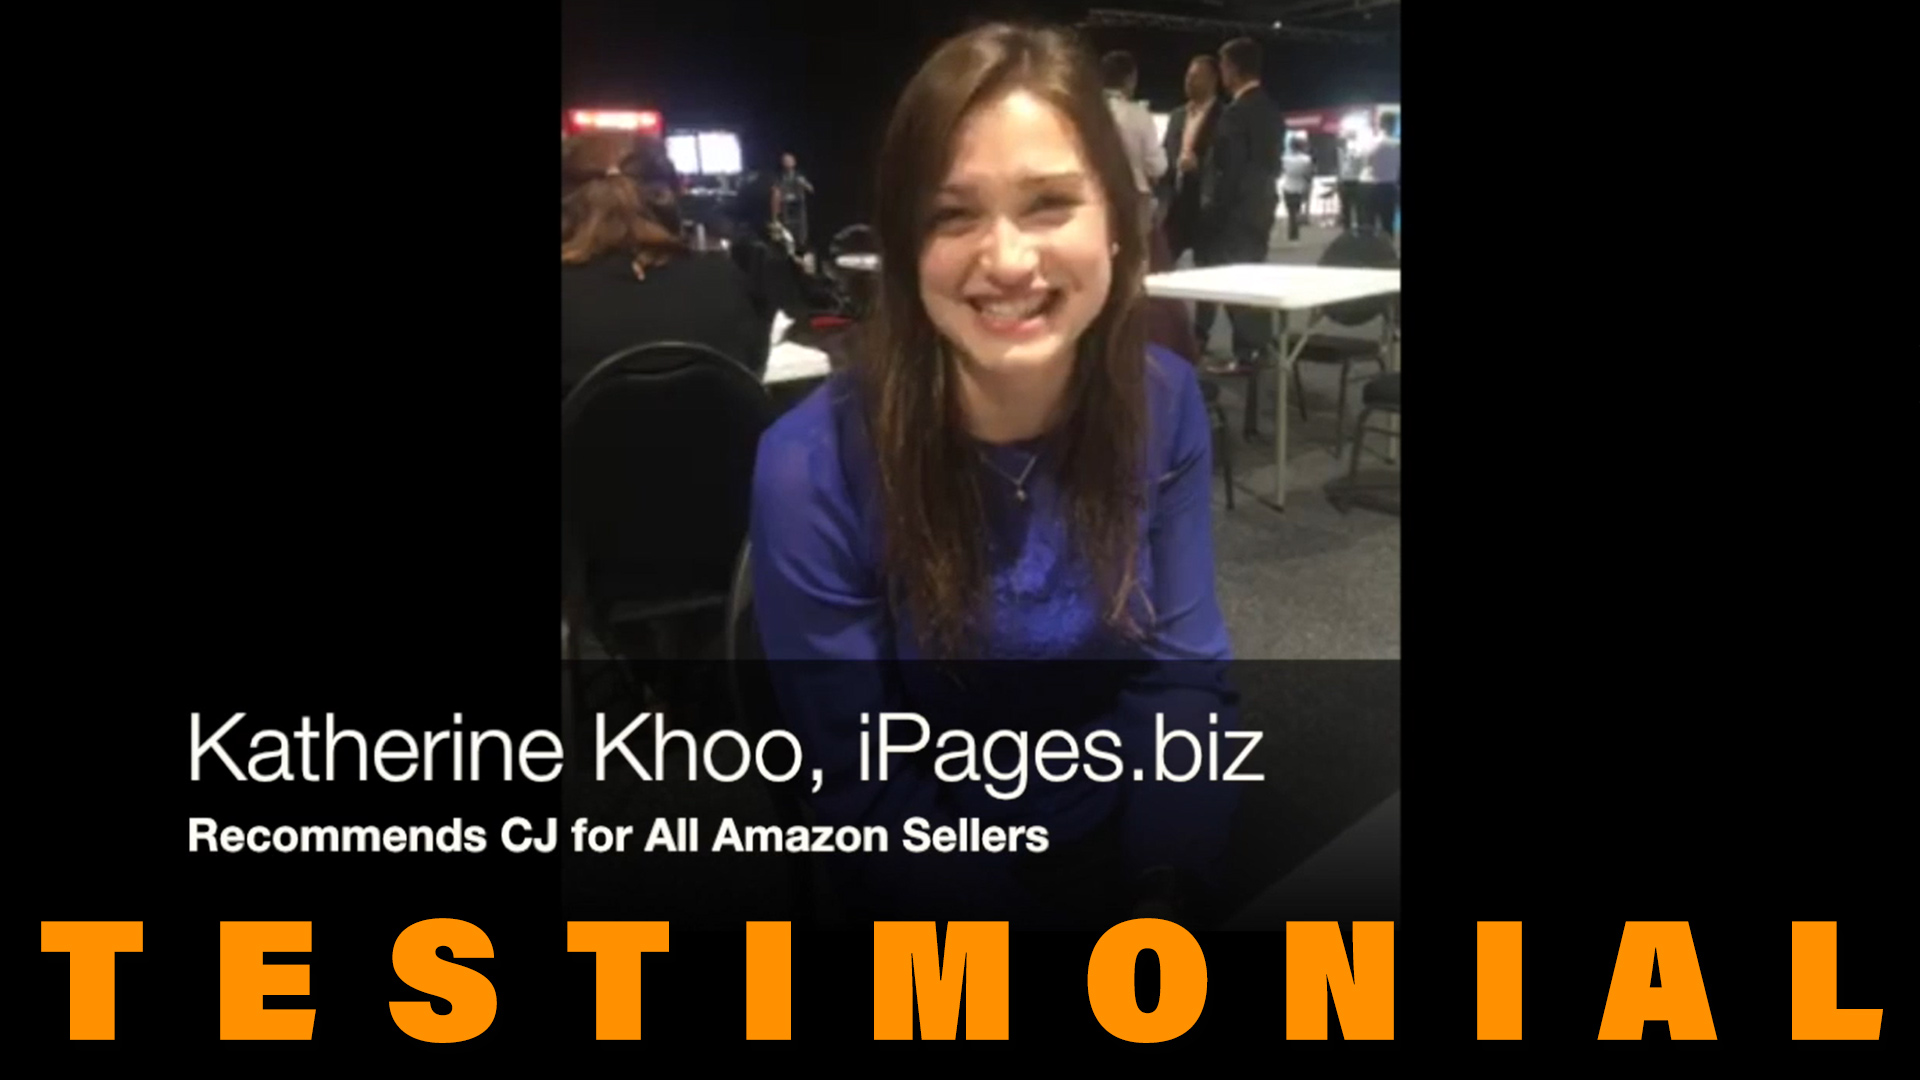 testimonial of AMZ Vendor Katherine Khoo (iPages.biz) recommends CJ for all Amazon sellers